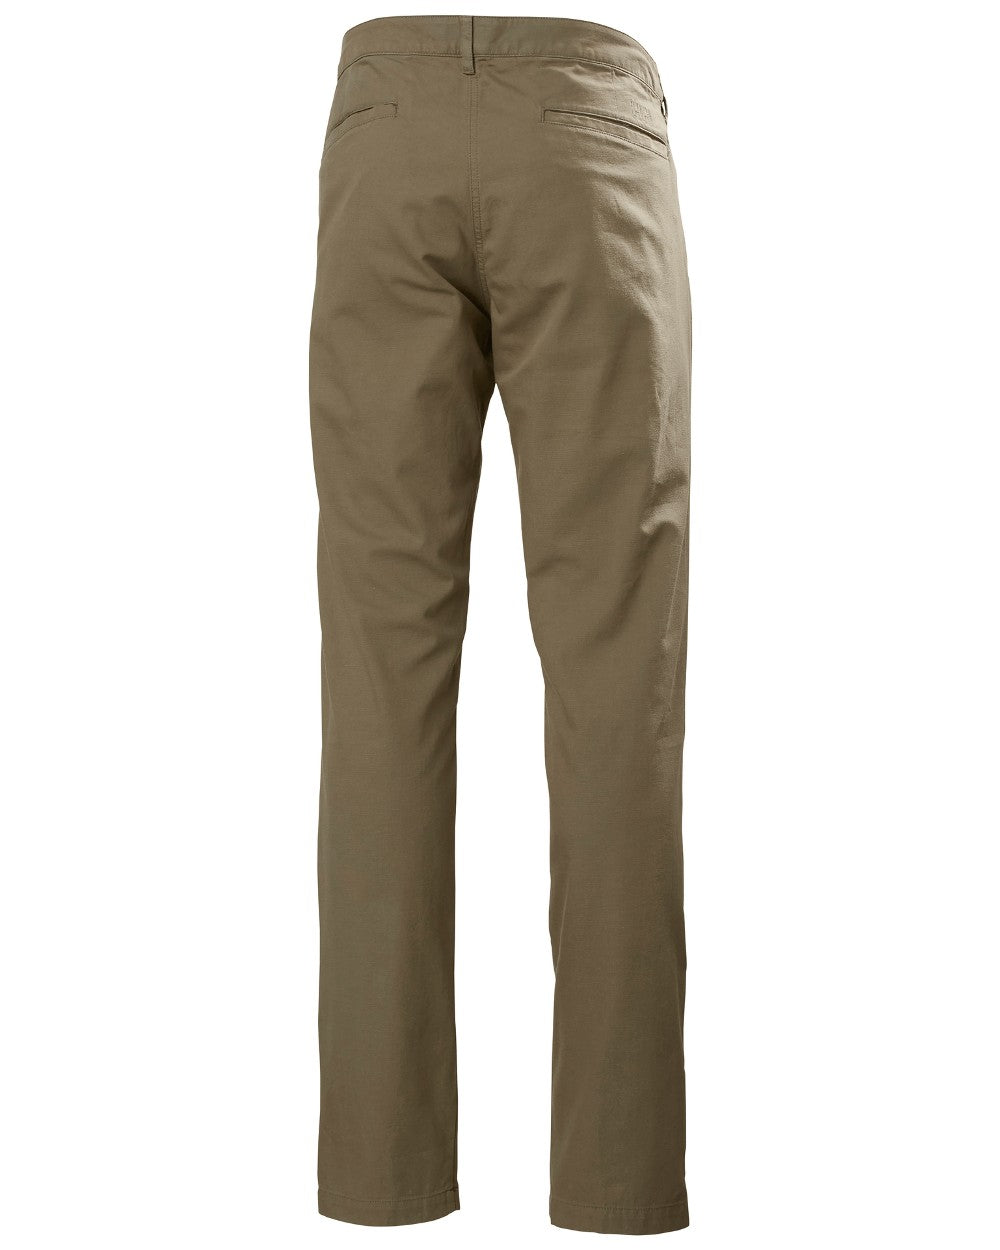 Bedrock coloured Helly Hansen Mens Dock Chinos on white background 